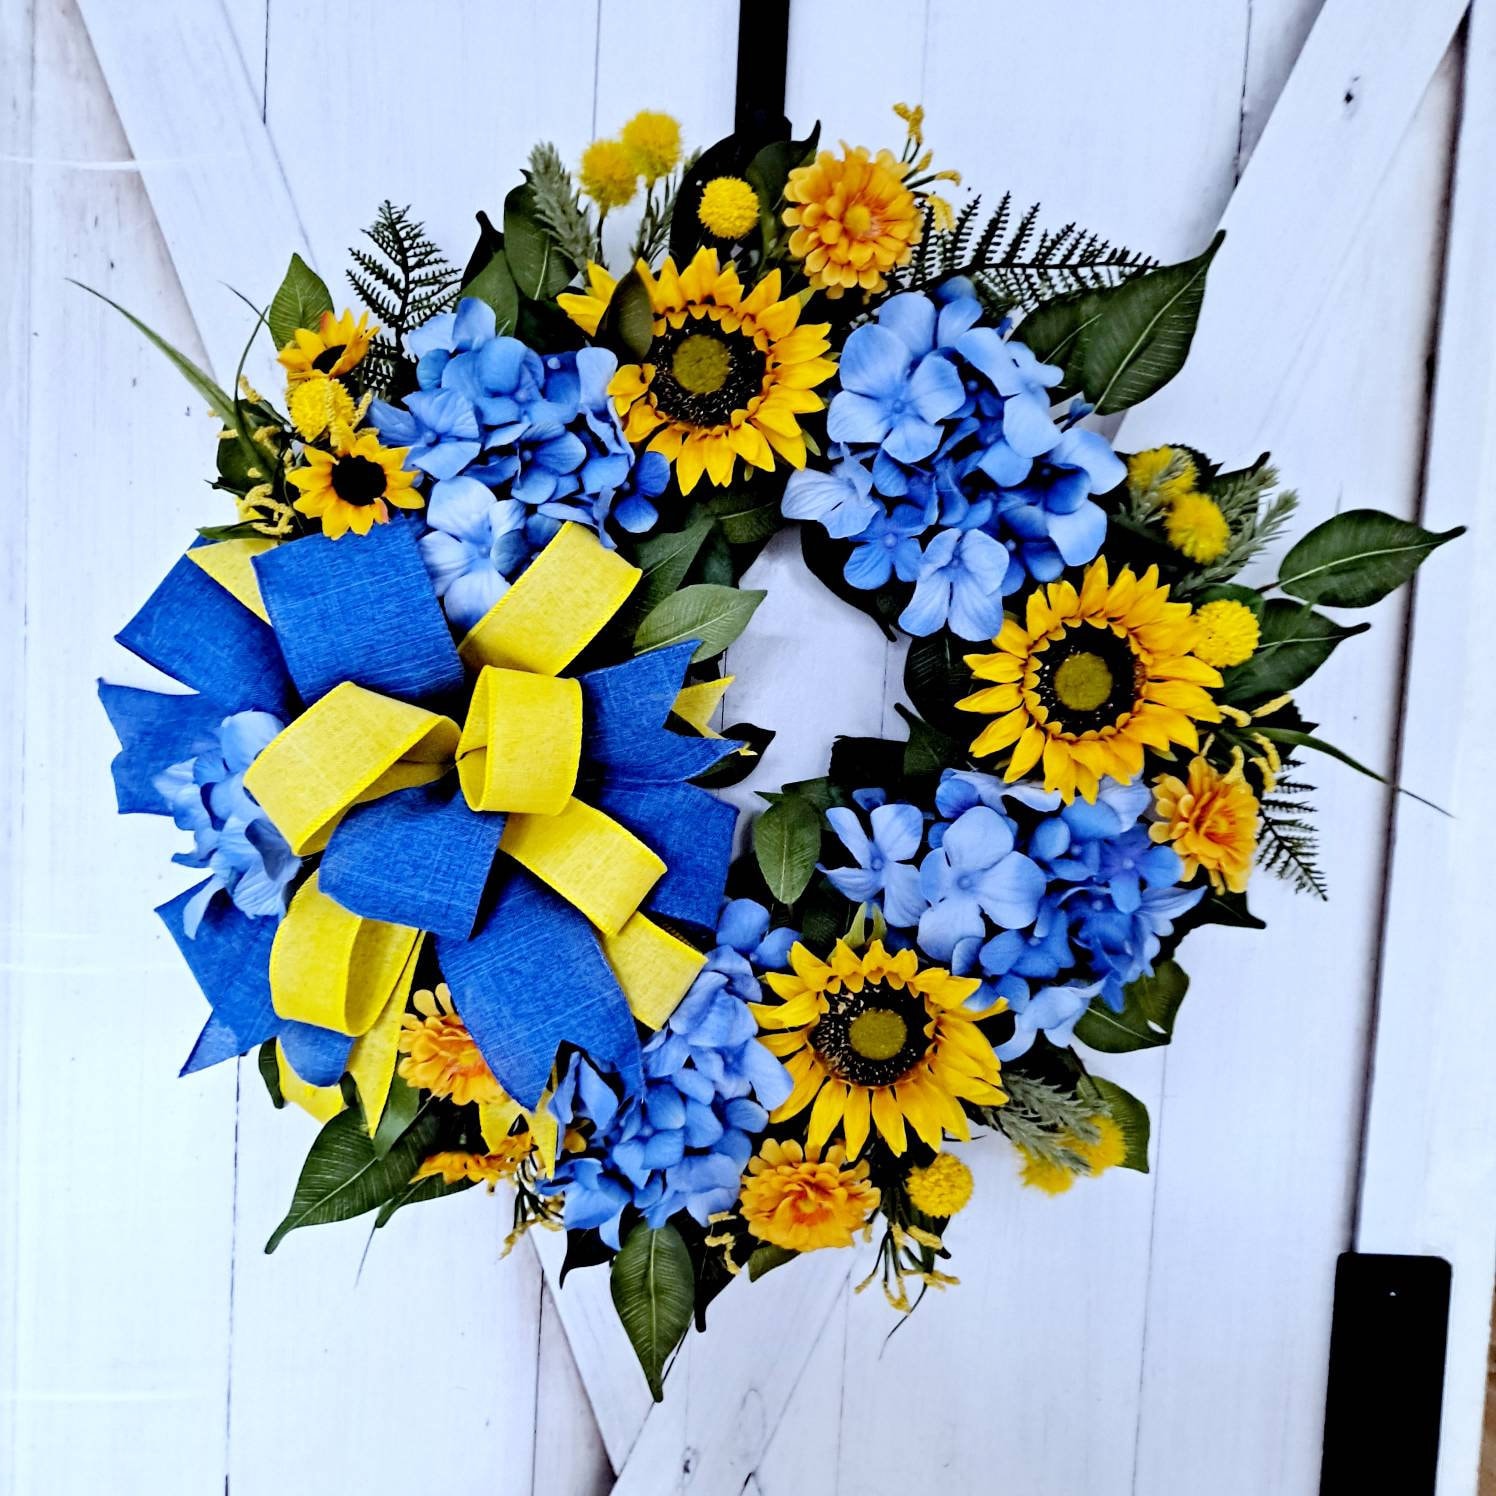 DEDEMCO Heart-Shaped Sunflower Wreath for Front Door,12 Inch Valentine Heart Wreath Spring Summer Sunflower Wreath Grapevine Wreath for Wedding Home Decor,Yellow 1pcs 